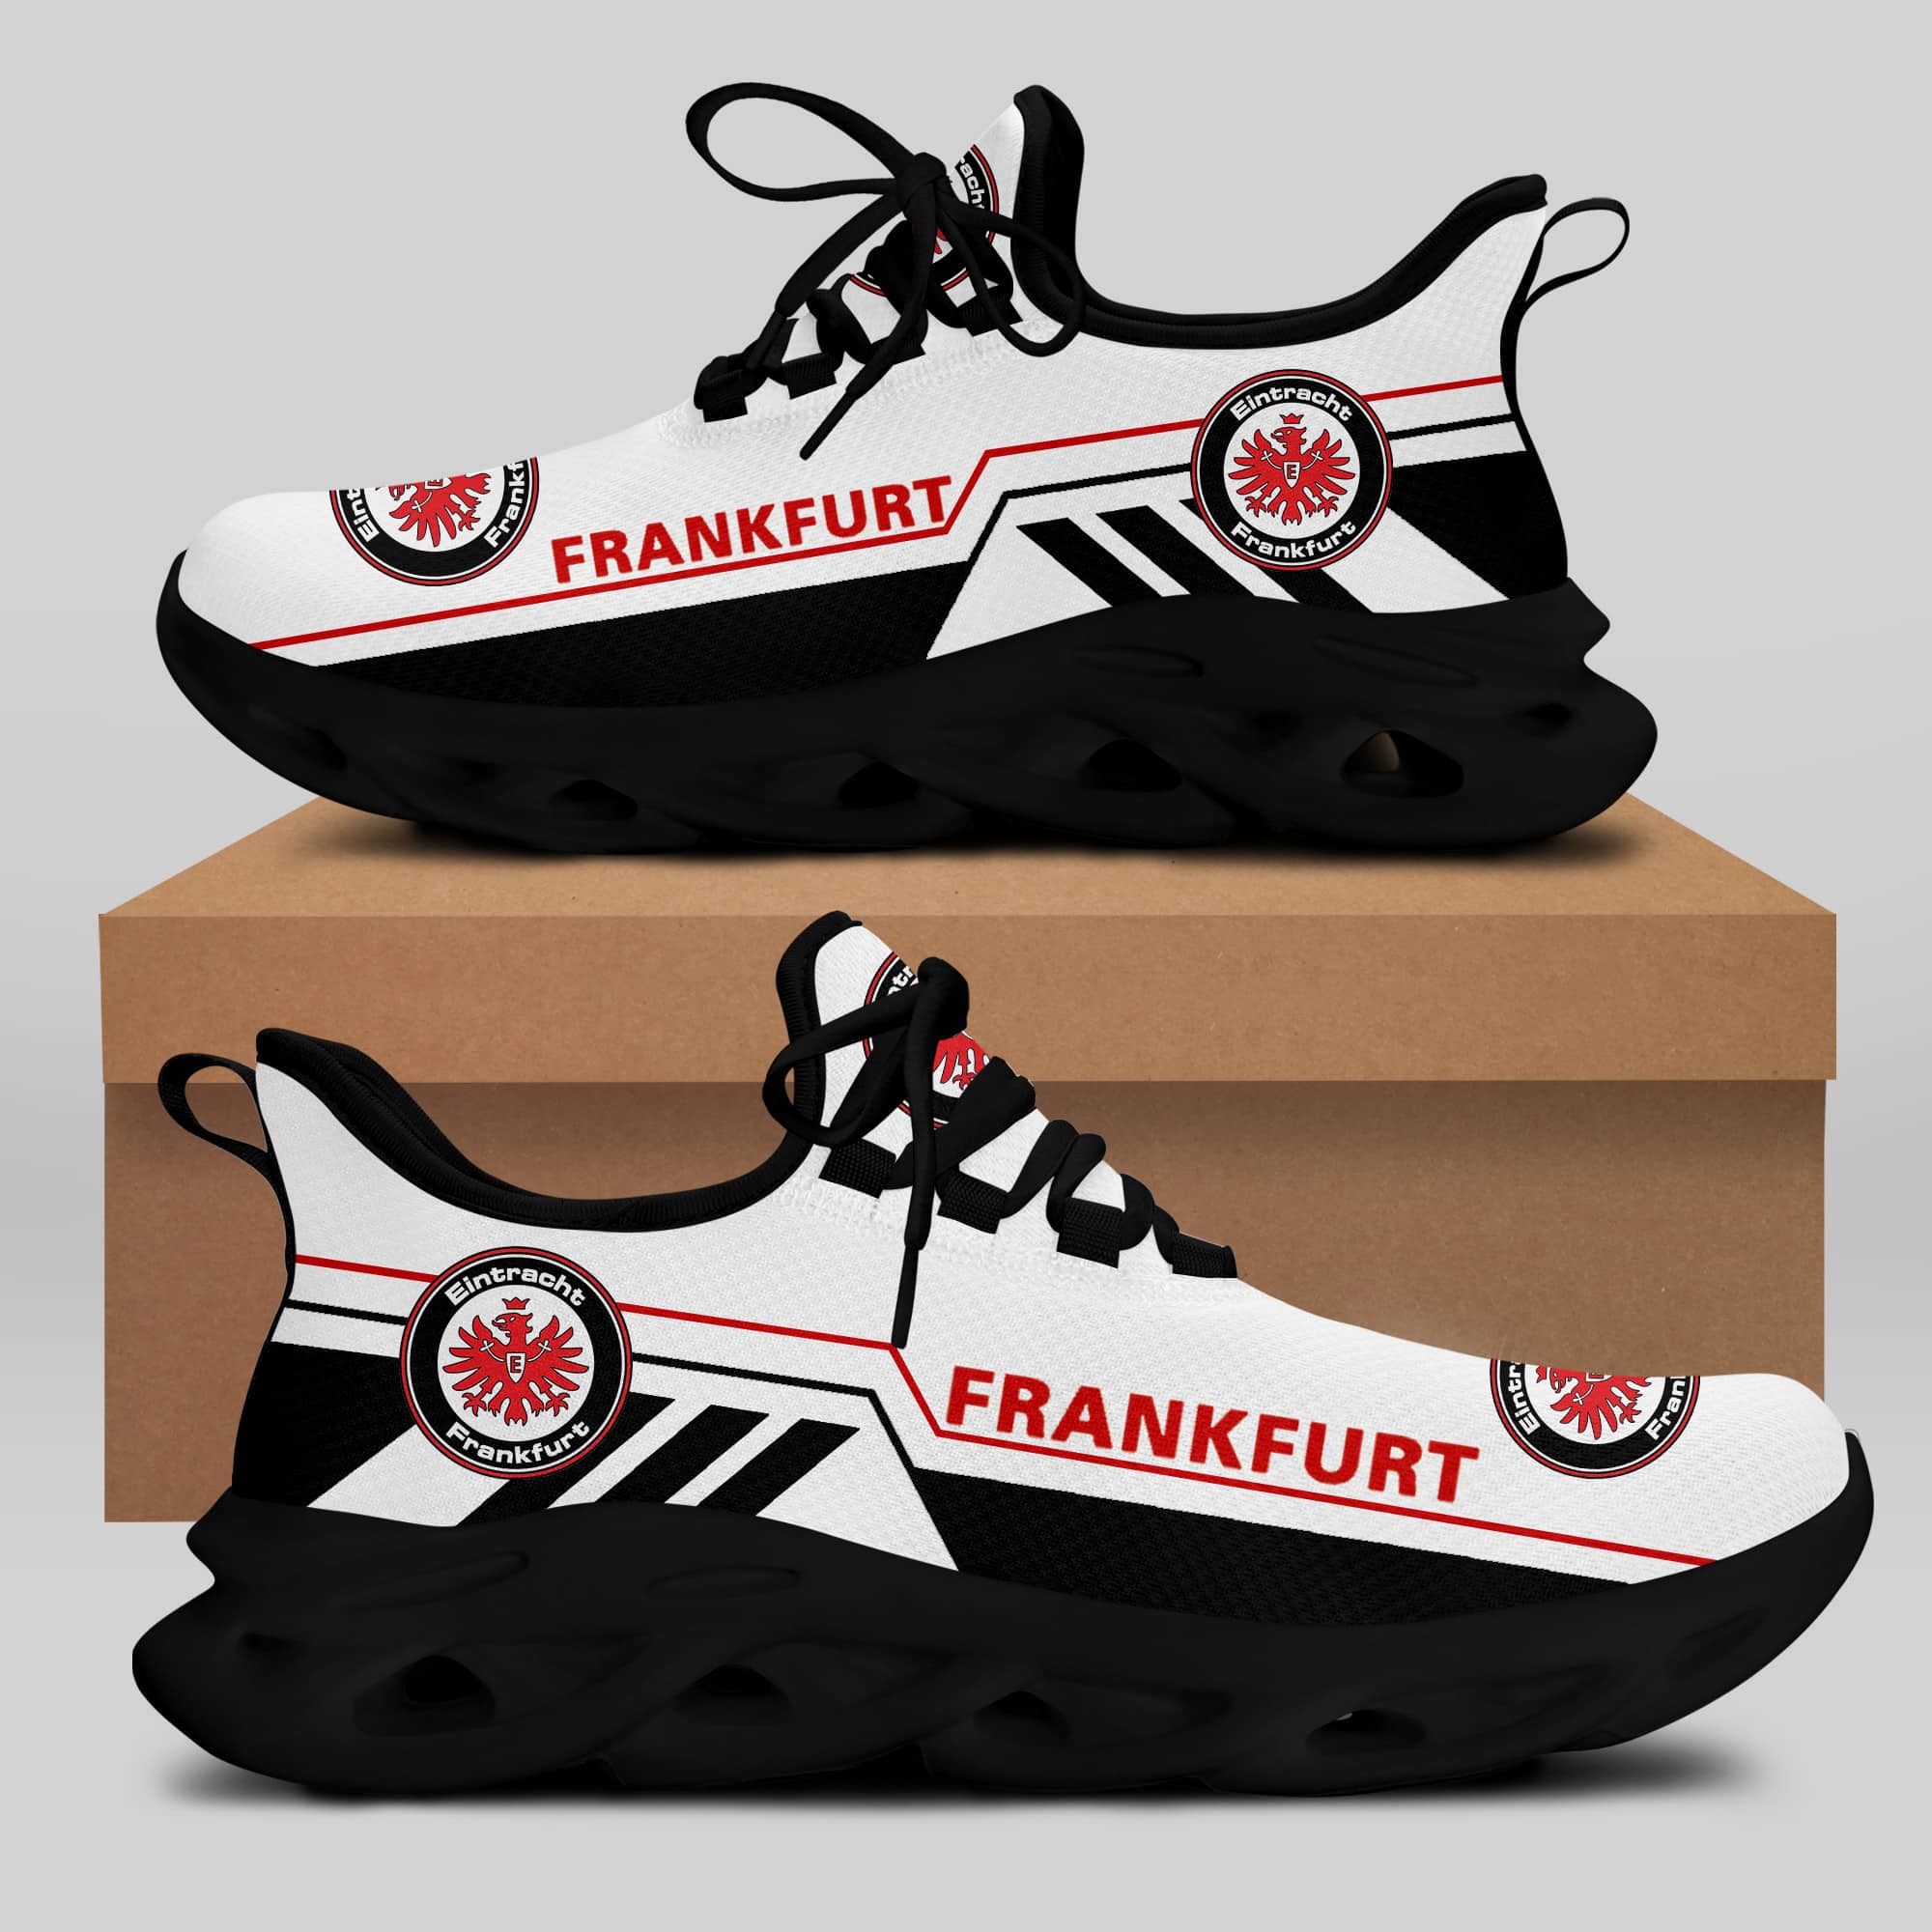 Eintracht Frankfurt Running Shoes Max Soul Shoes Sneakers Ver 16 2